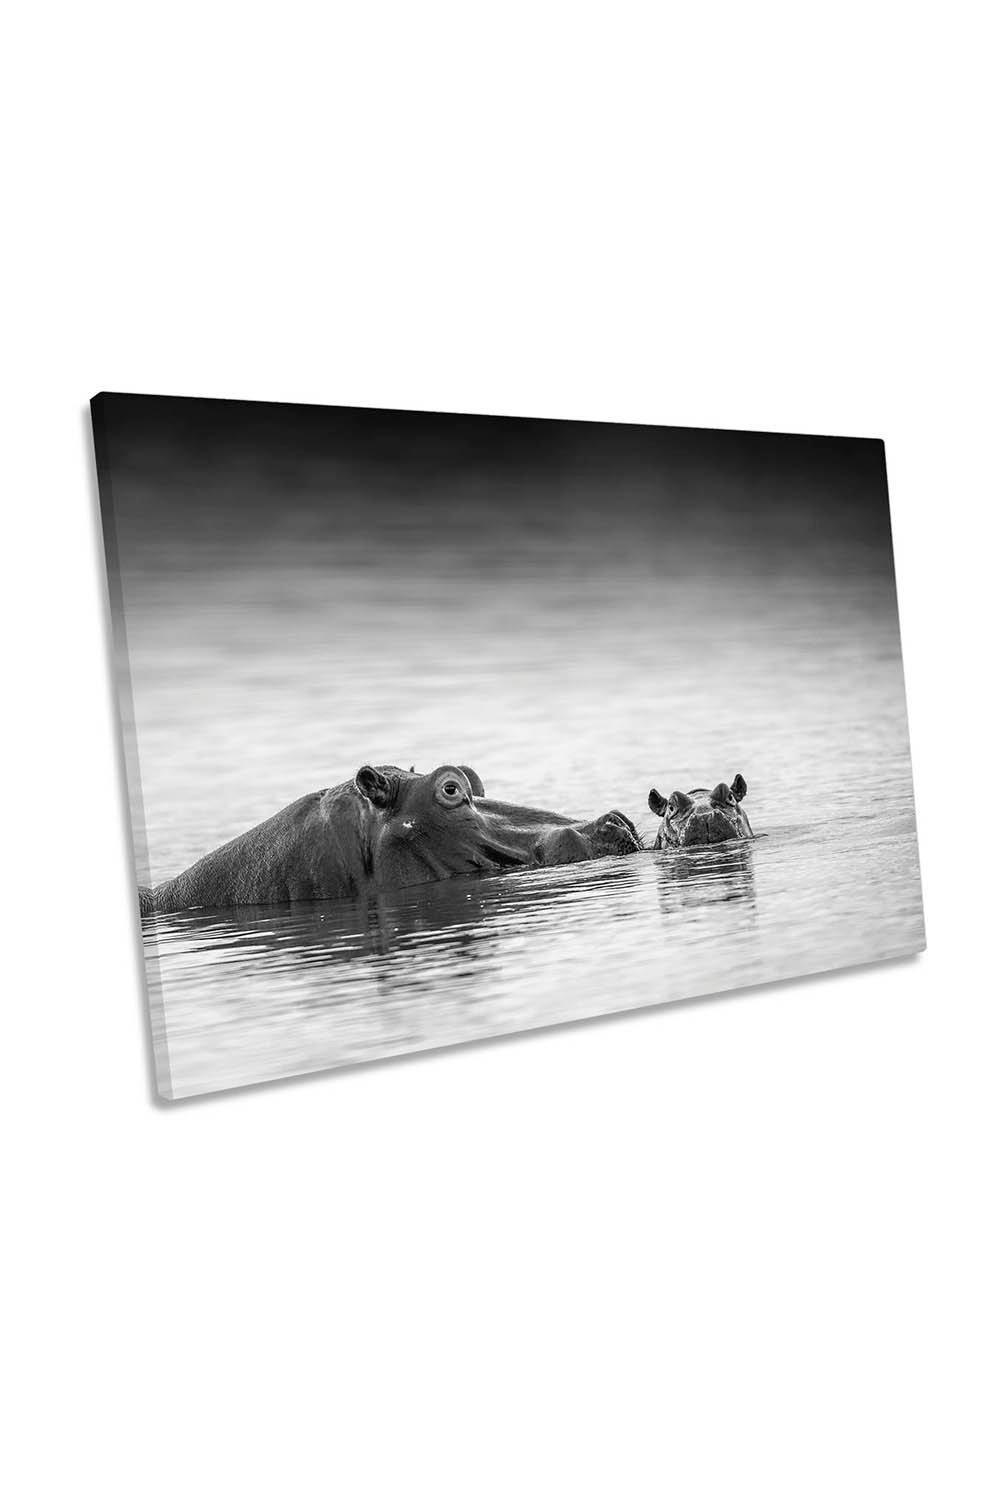 Eye Level Hippos Bathing Canvas Wall Art Picture Print